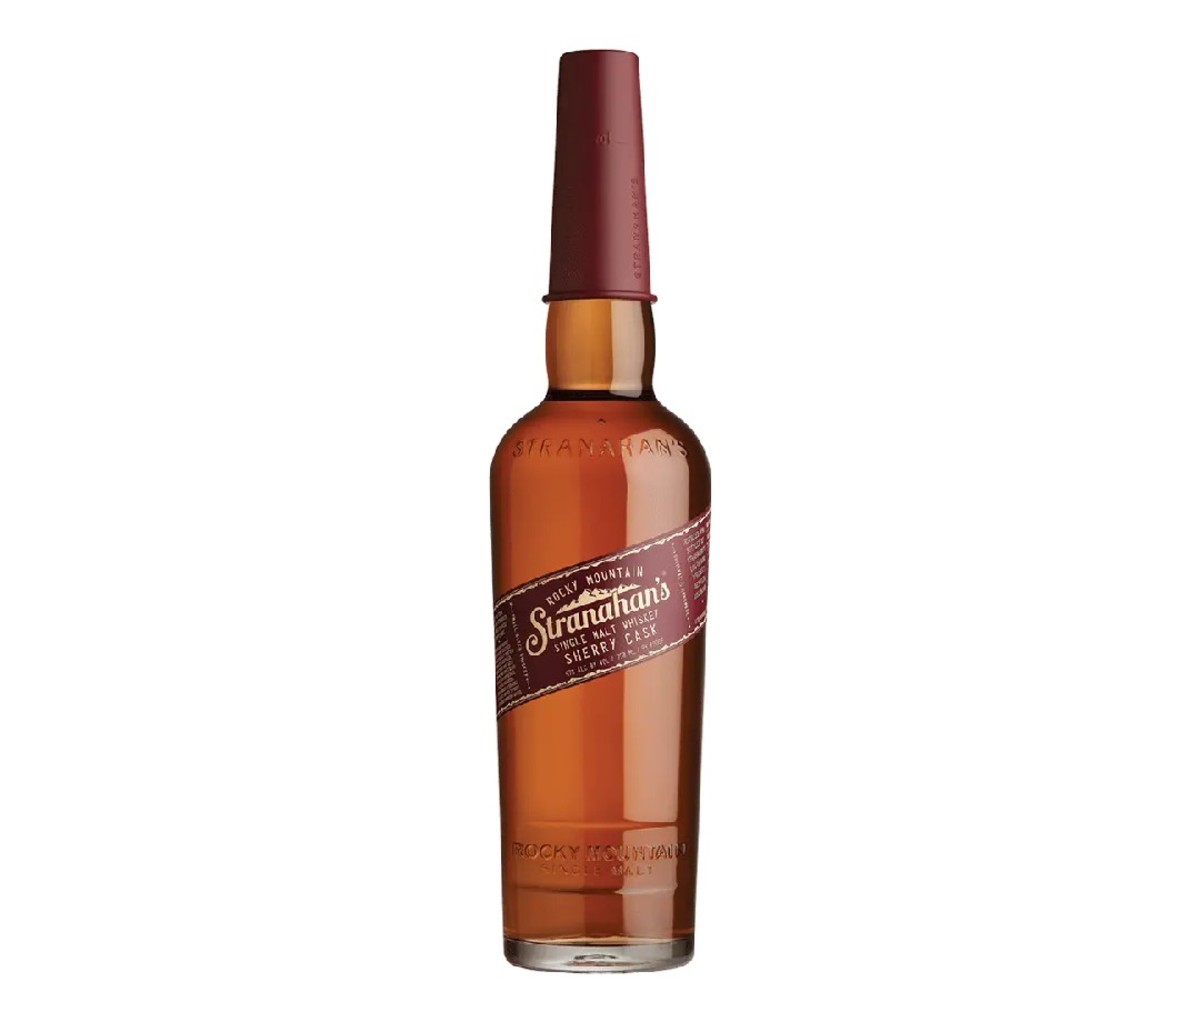 A bottle of Stranahan’s Sherry Cask whiskey